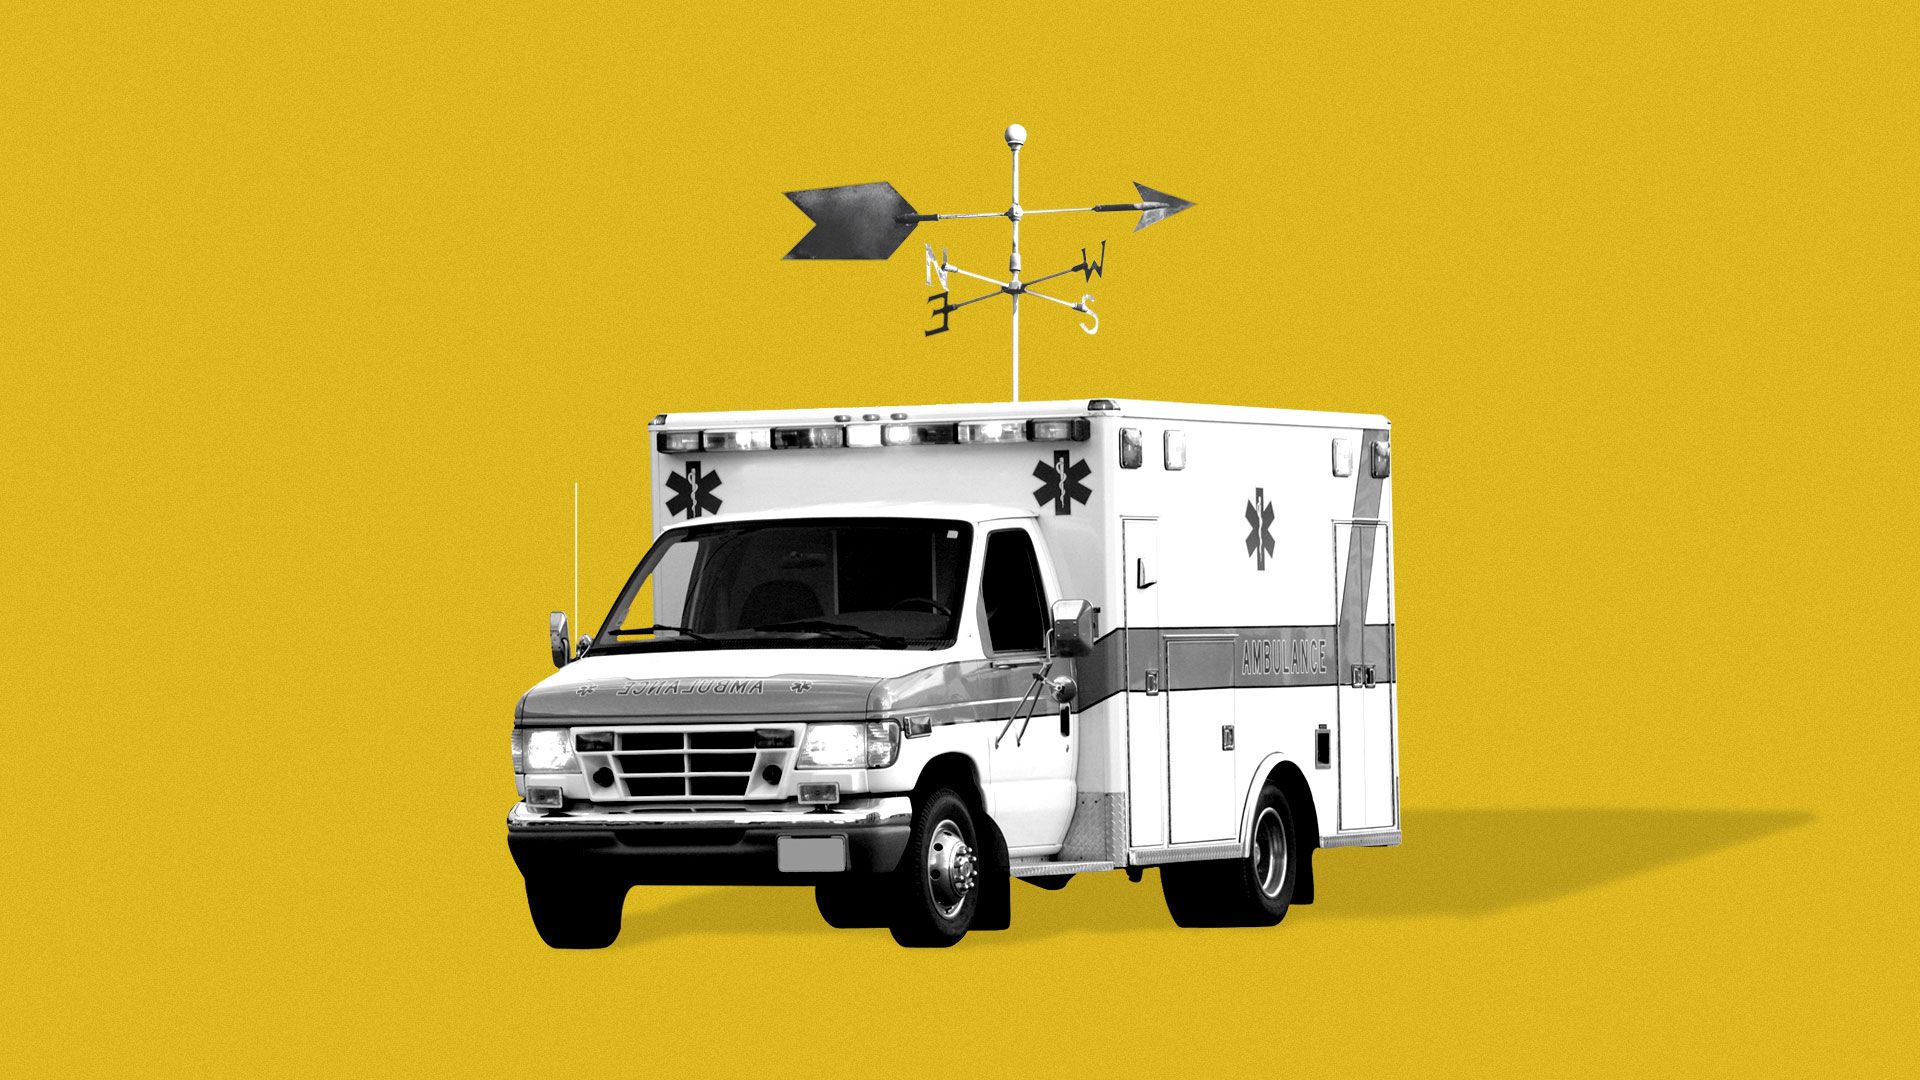 Illustration of ambulance with a weather vane on the roof.